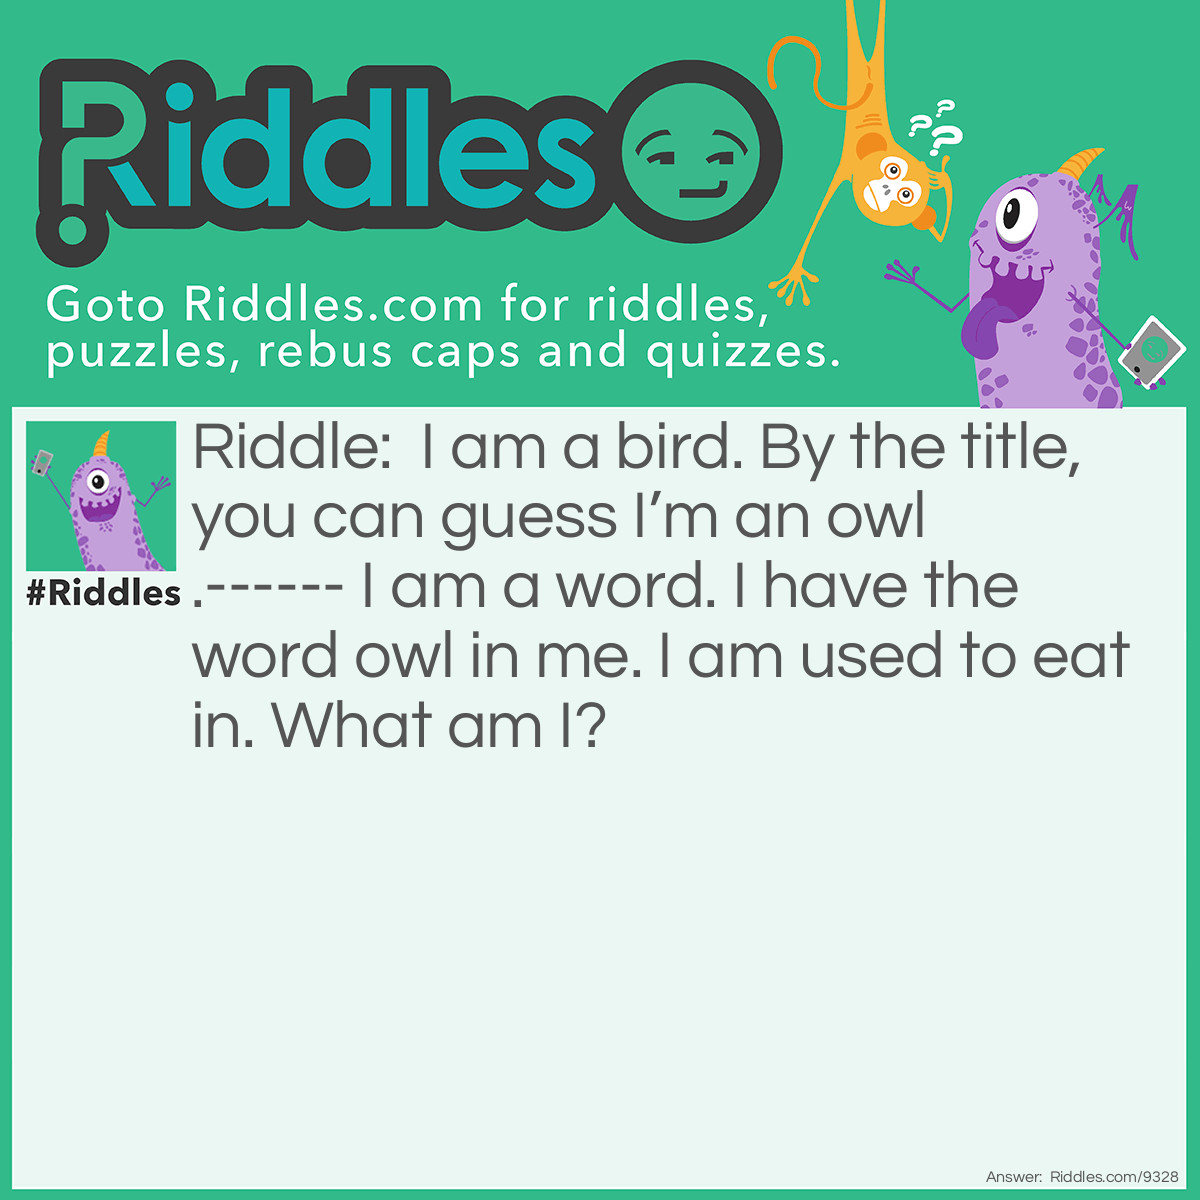 Riddle: I am a bird. By the title, you can guess I'm an owl.------ I am a word. I have the word owl in me. I am used to eat in. What am I? Answer: A bowl.